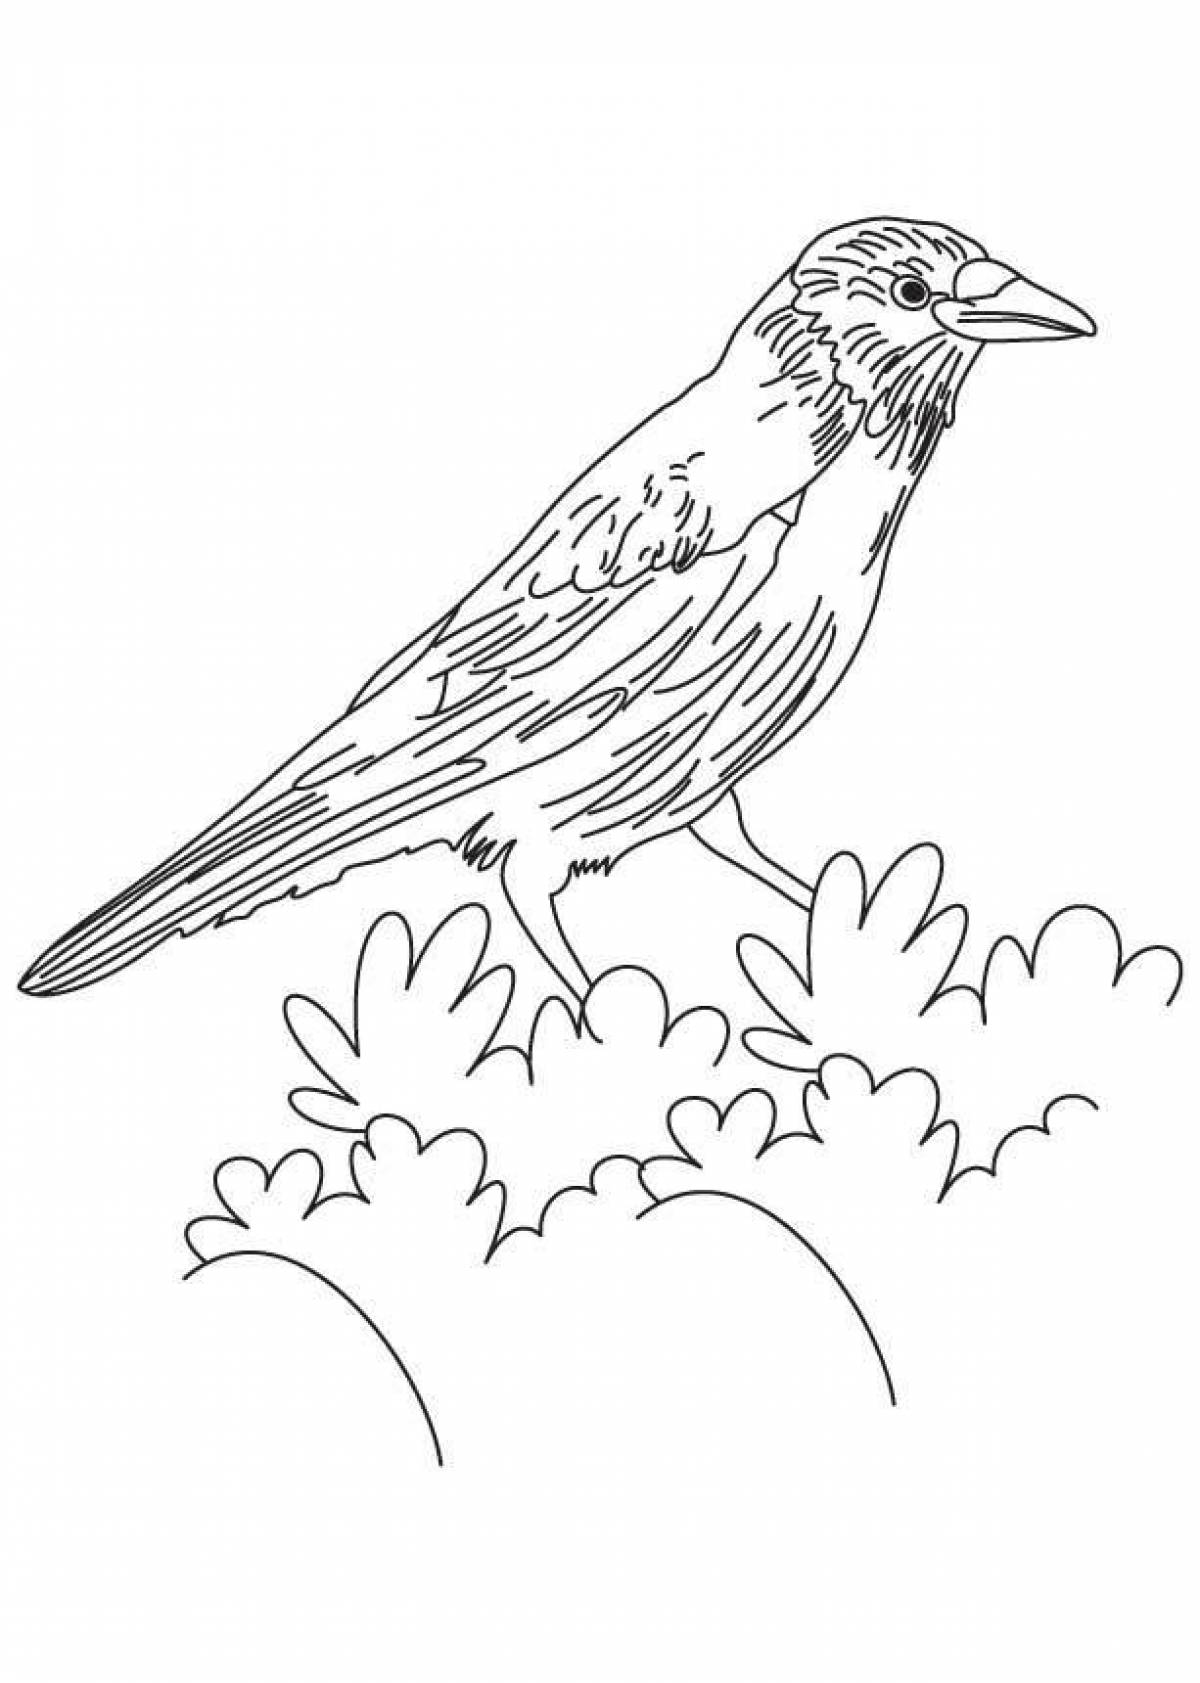 Creative crow coloring for kids